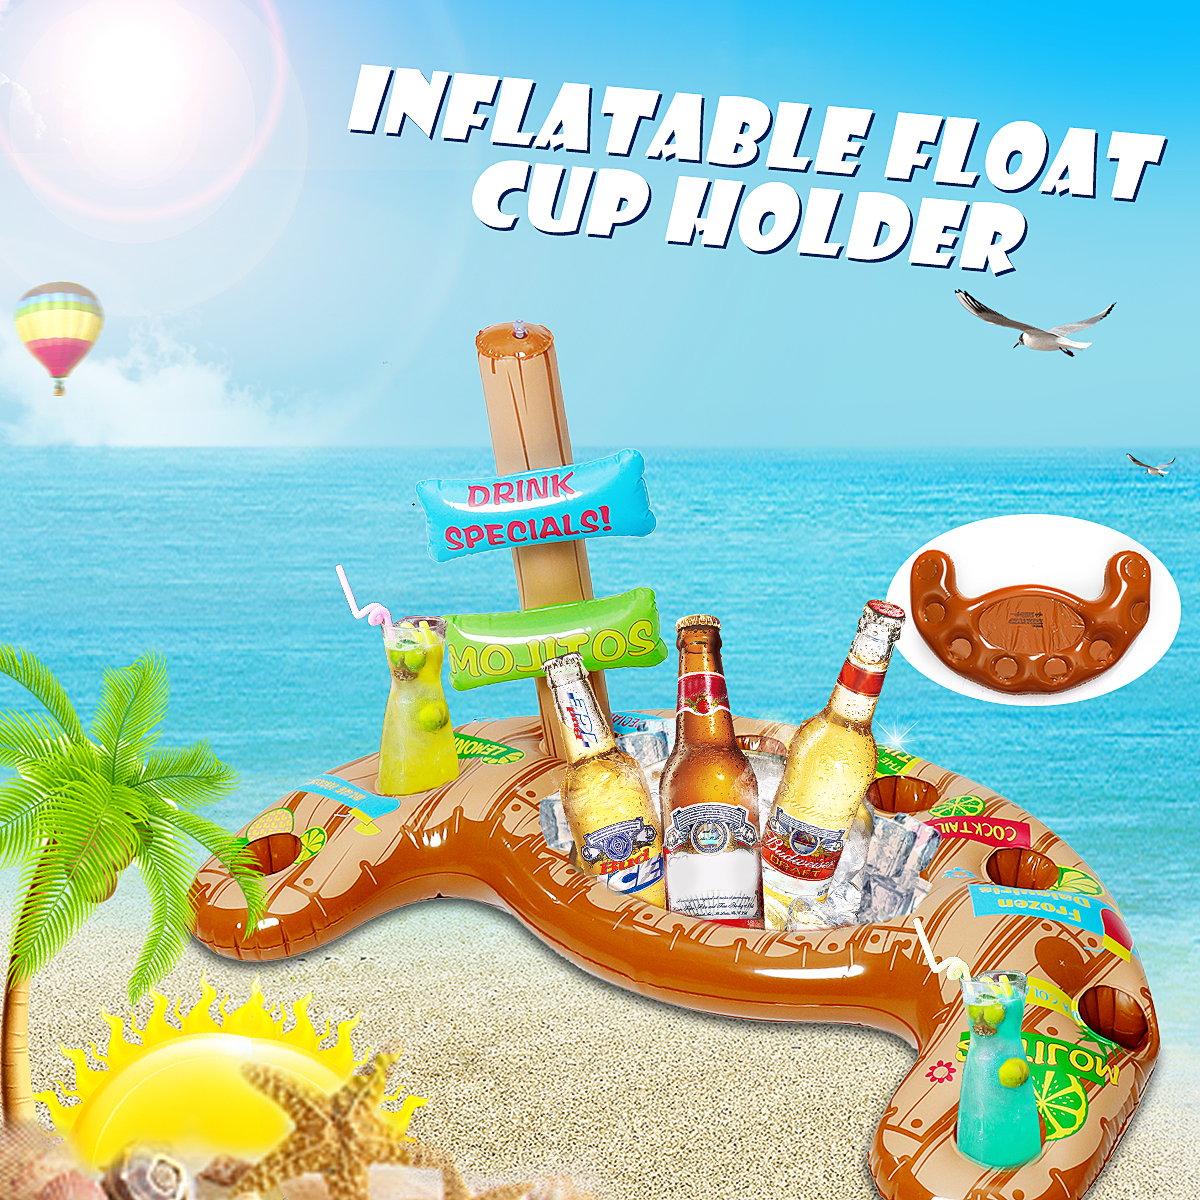 Inflatable-Float-Cup-Holder-Drink-Ice-Bucket-Cooler-Beach-Swim-Party-Water-Play-Fun-Toy-1509216-2